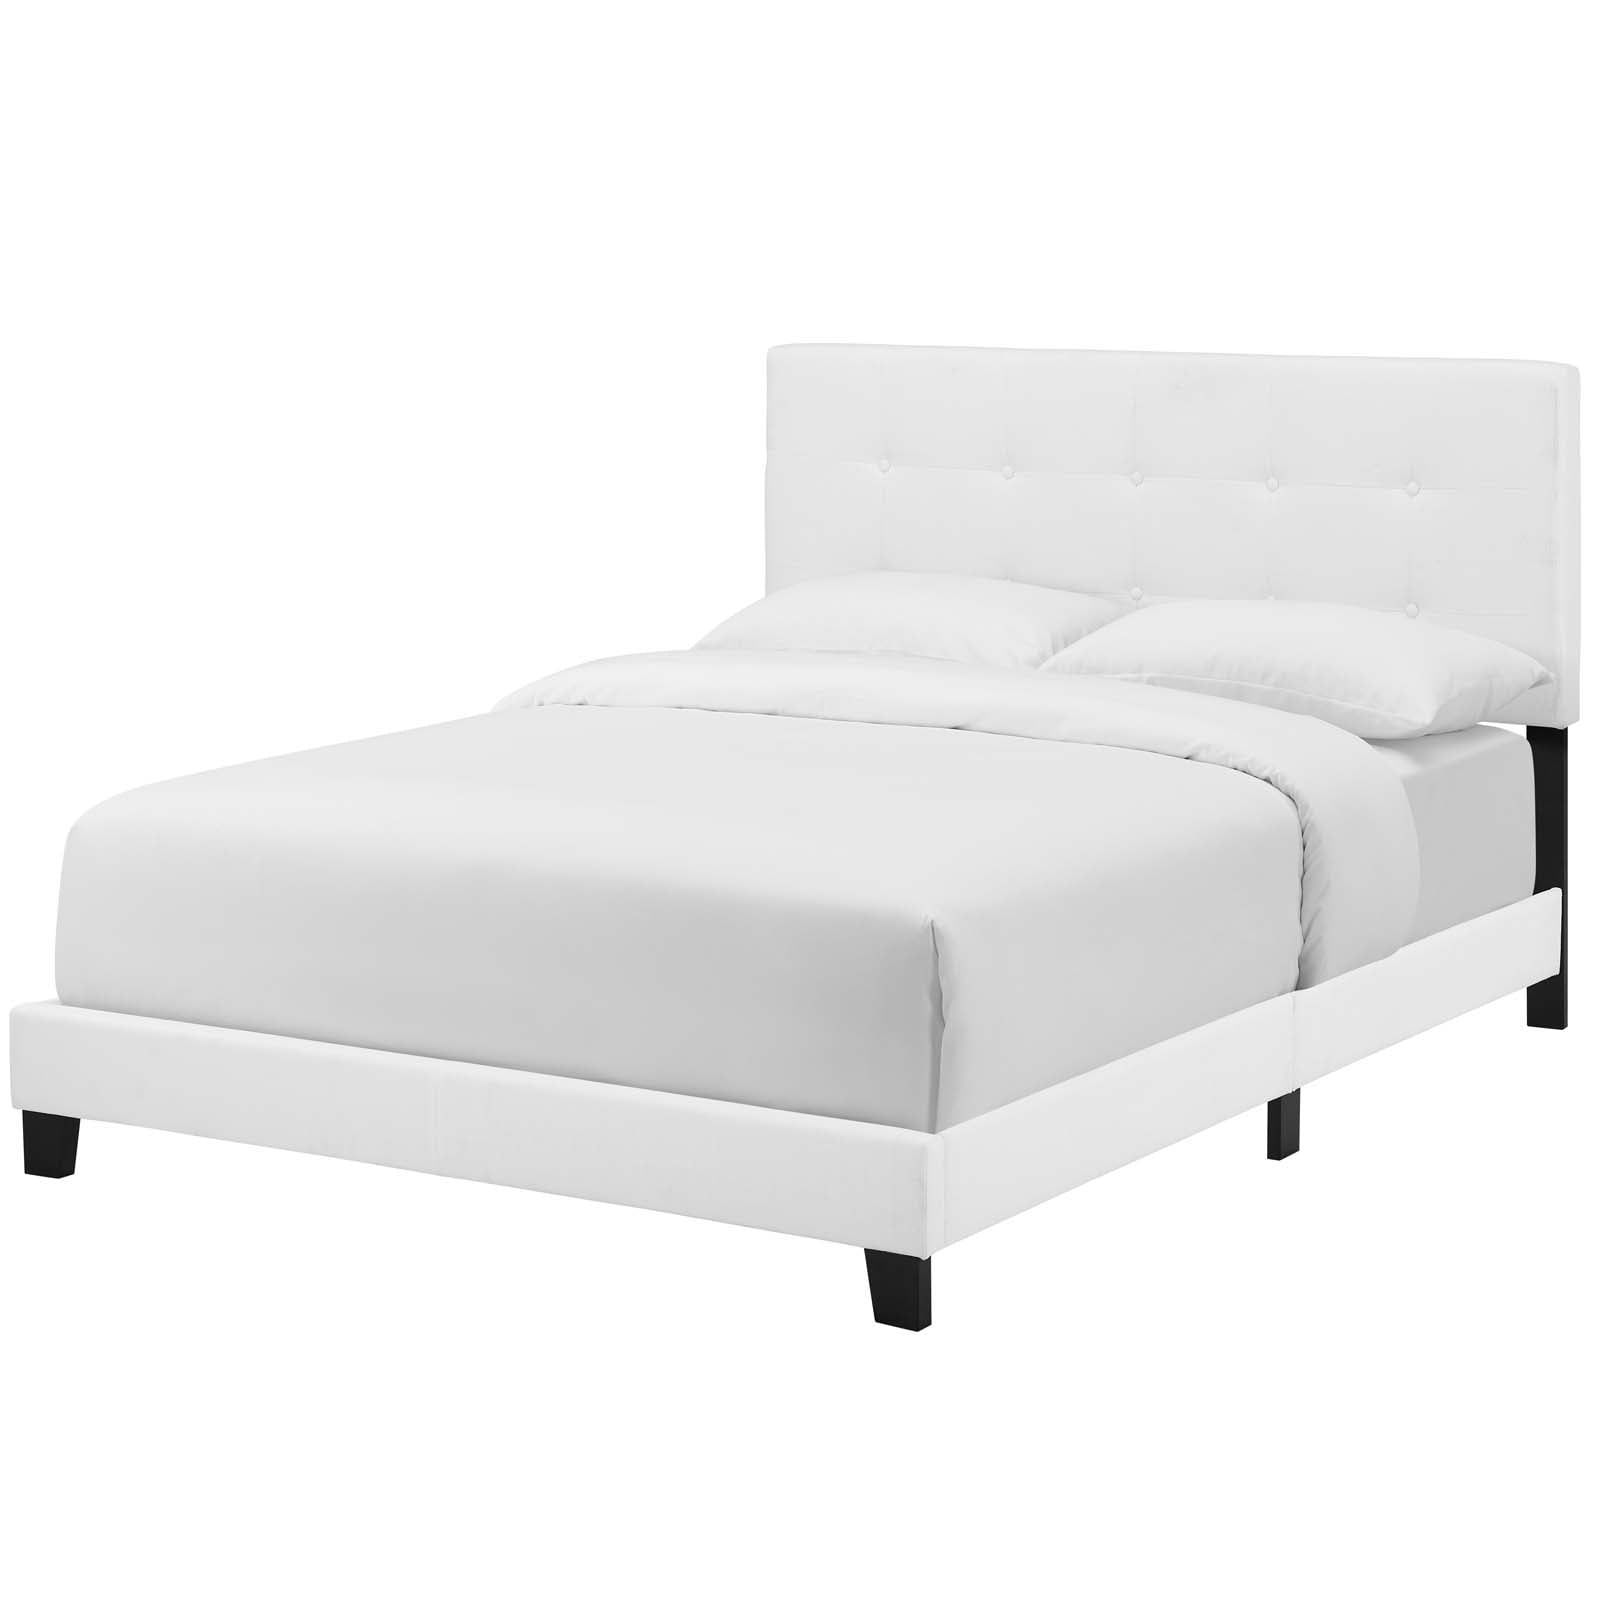 Elegant Full-Size White Fabric Upholstered Platform Bed with Tufted Headboard